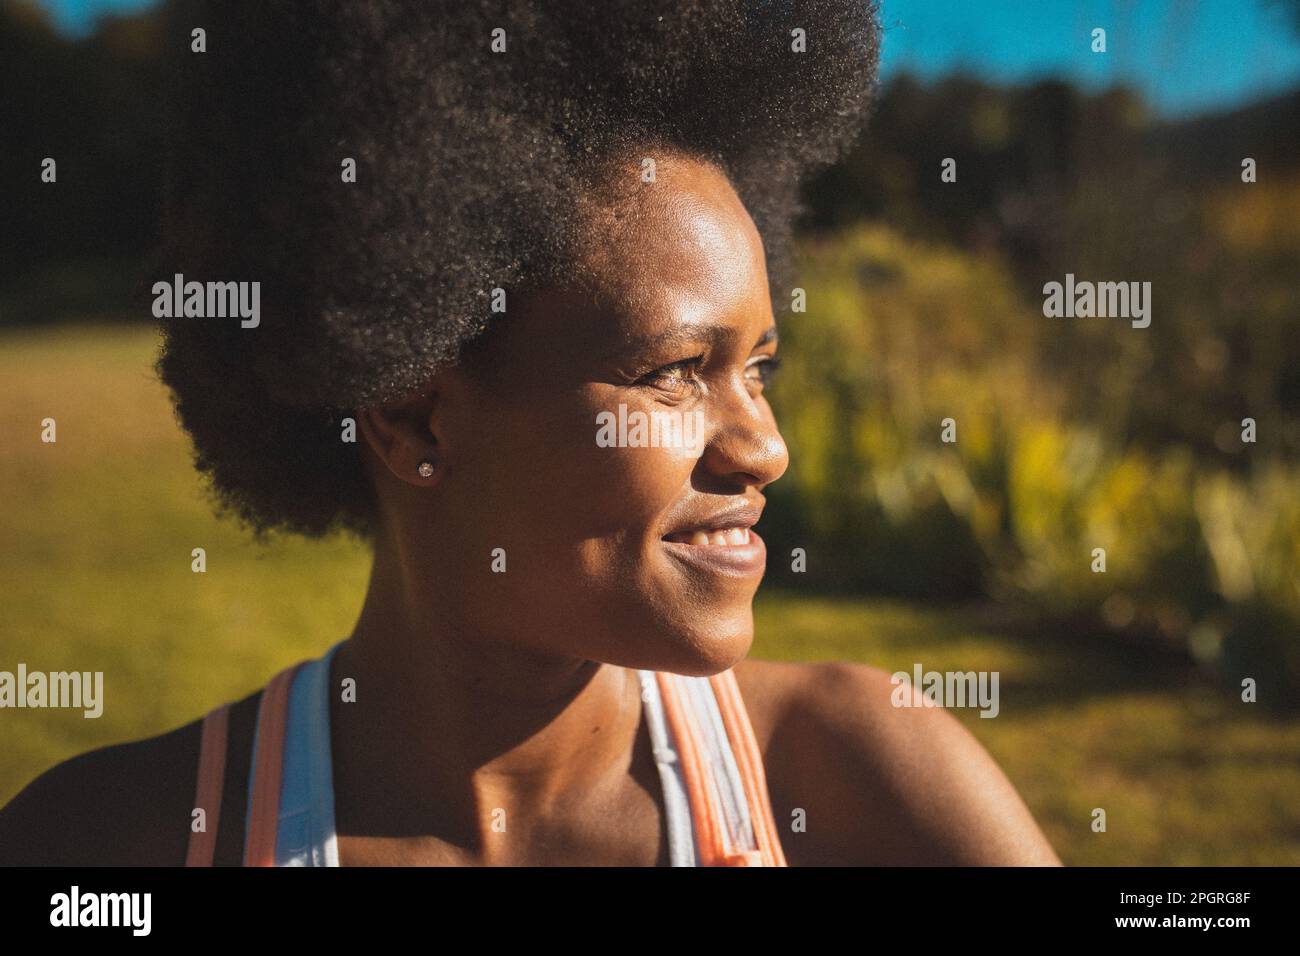 Portrait of african american woman looking ahead and smiling Stock Photo